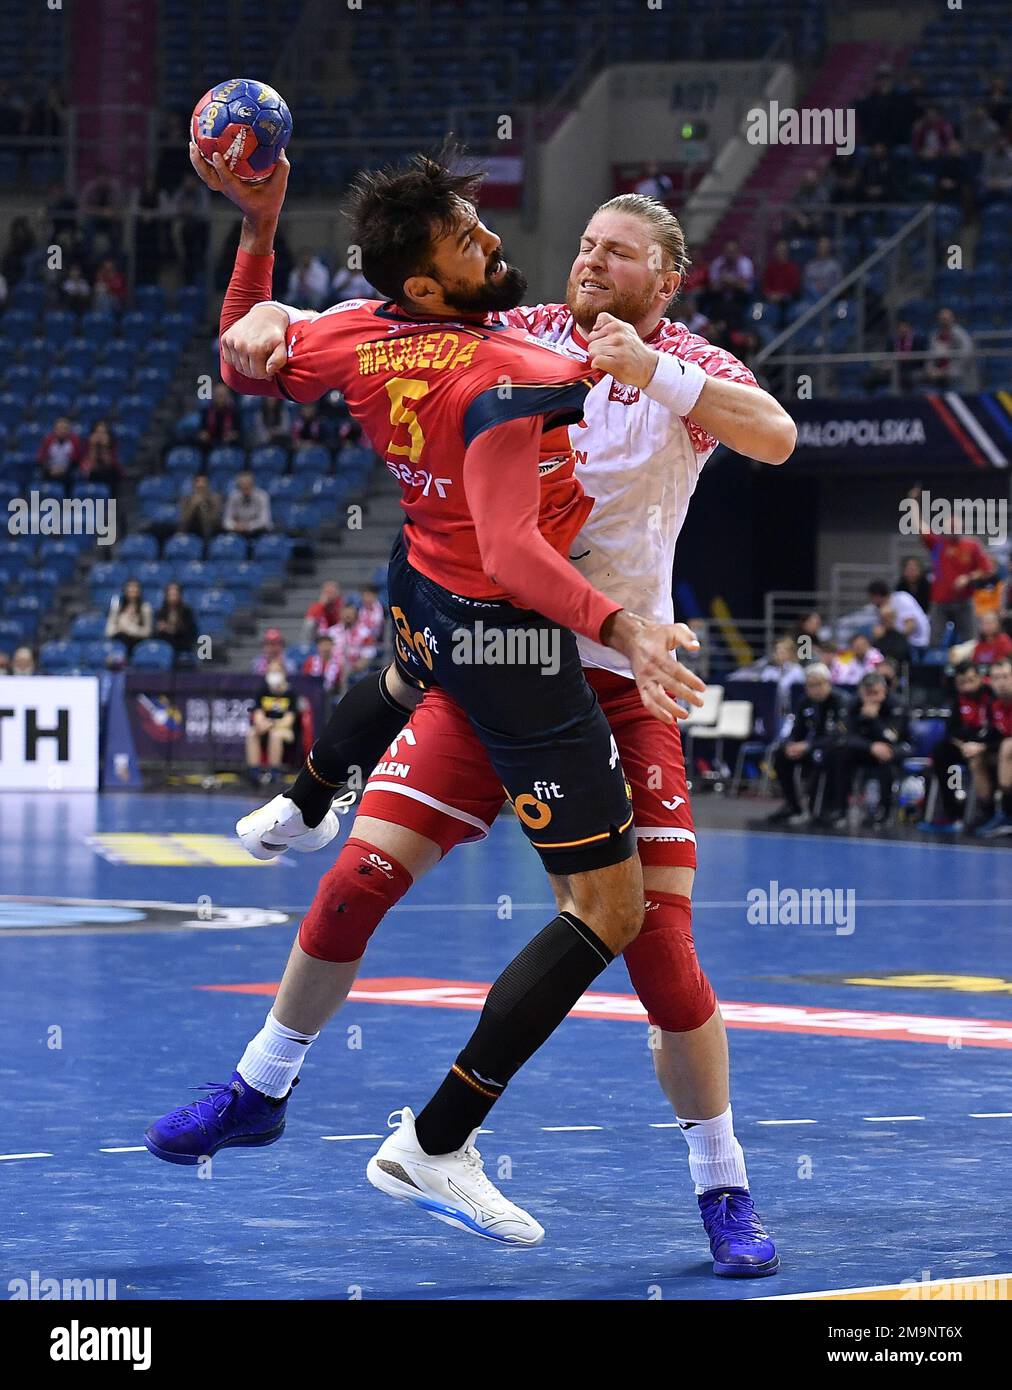 Cracow, Poland. 18th Jan, 2023. Maciej Gebala Jorge Maqueda Peno during IHF Men's World Championship match between Poland and Spain on January 18, 2023 in Cracow, Poland. (Photo by PressFocus/Sipa USA) Credit: Sipa USA/Alamy Live News Stock Photo